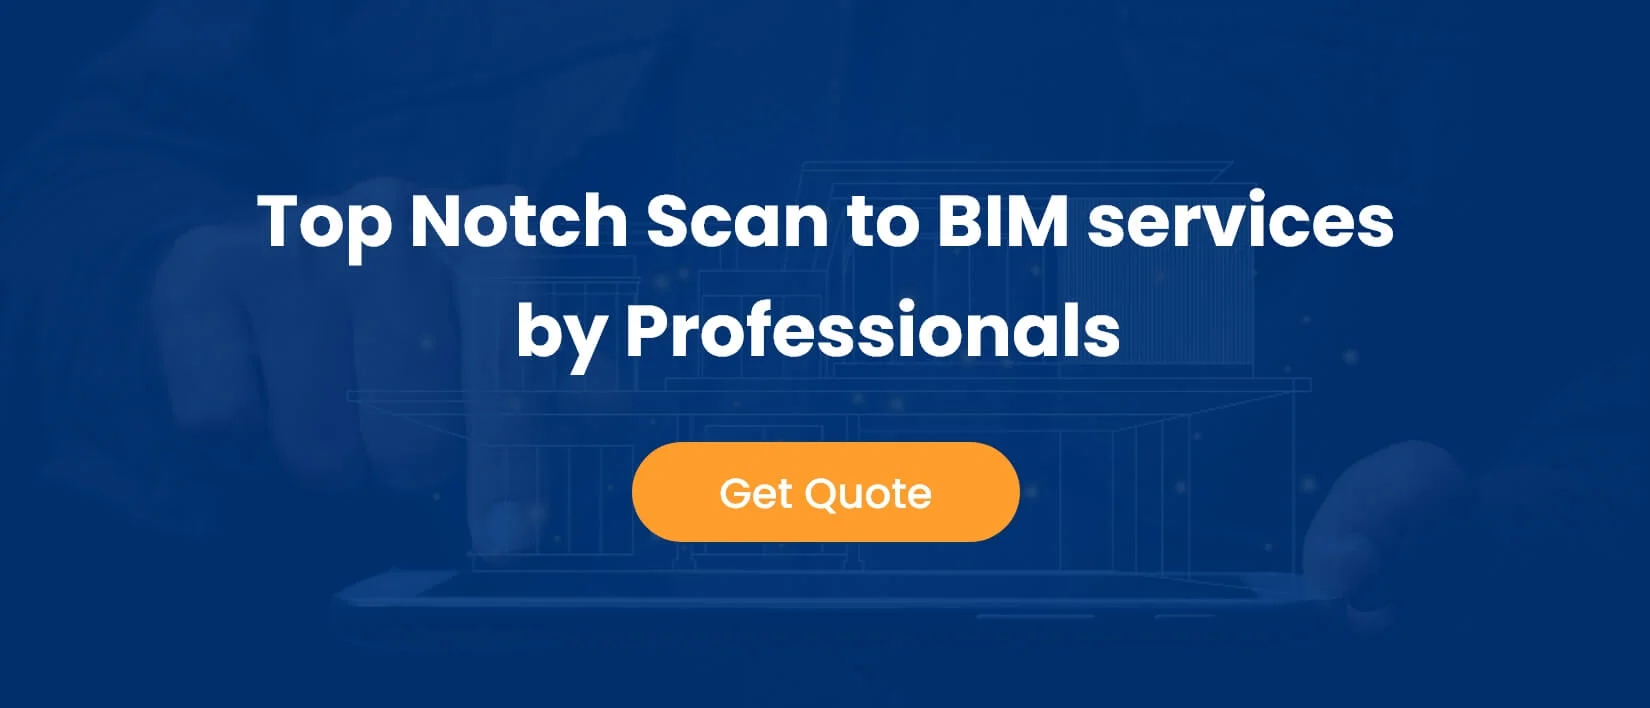 Hire Dedicated BIM Services Experts for your Next Project